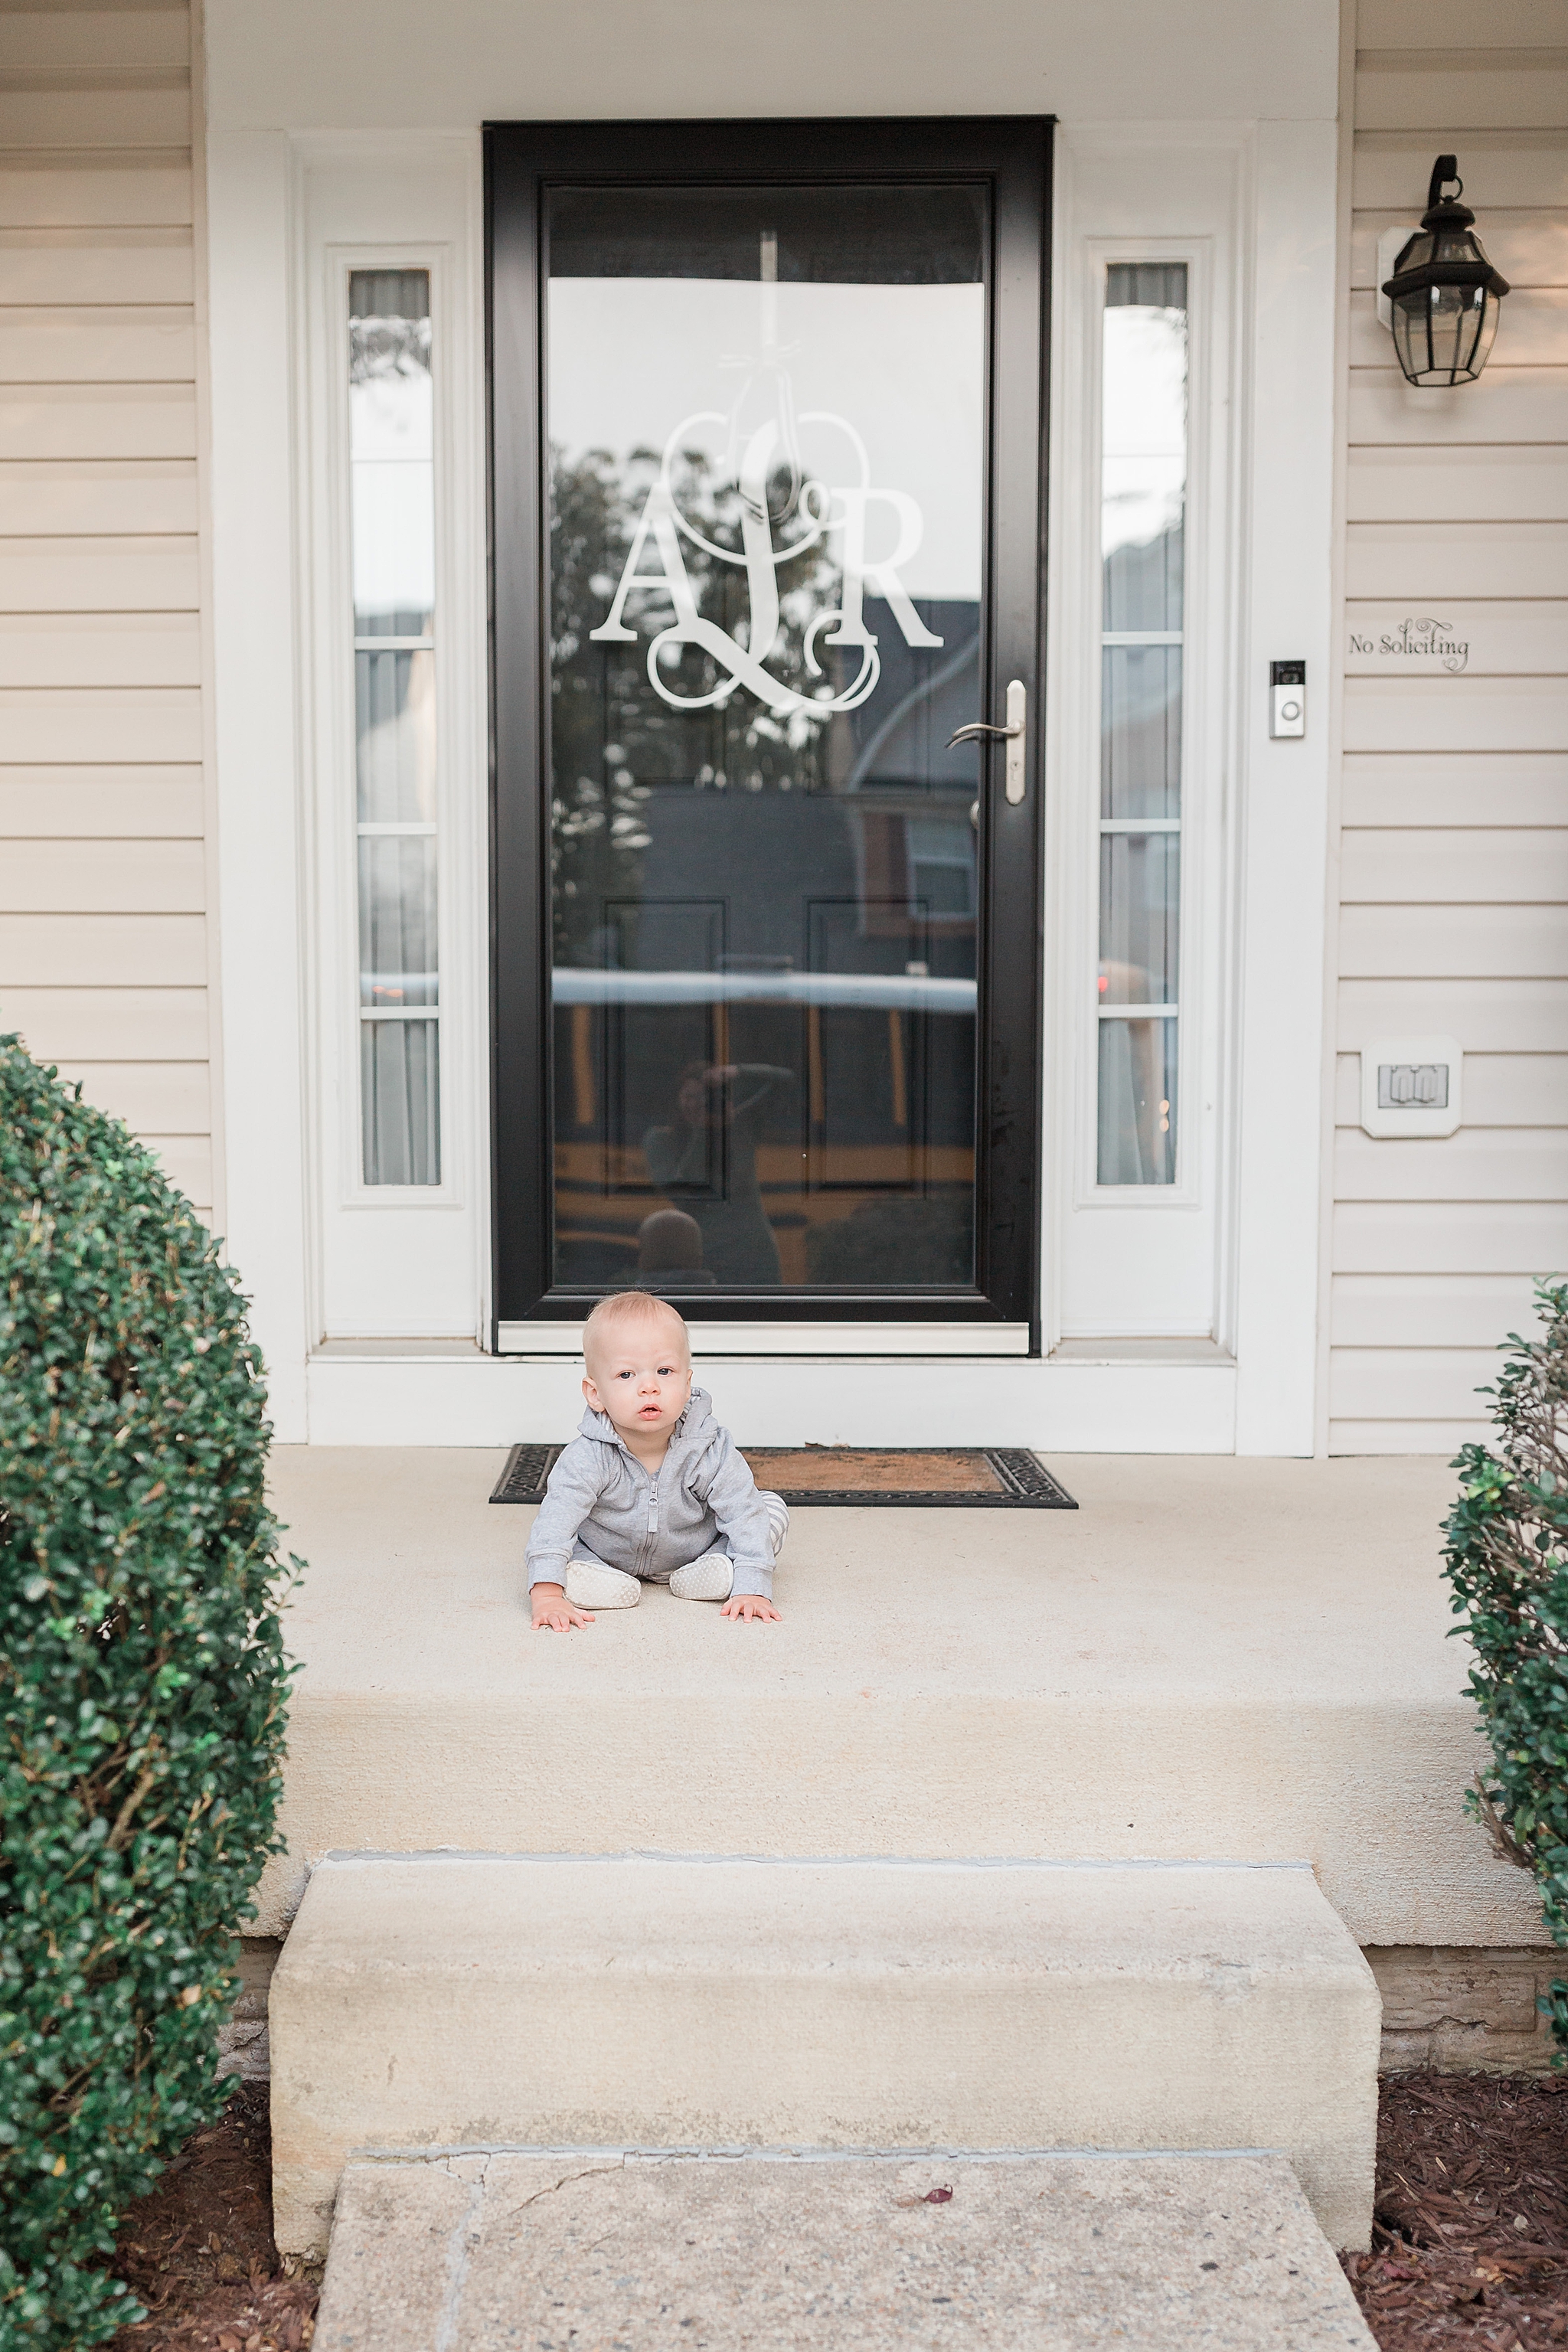 This DC wedding photographer shares personal photos of her new son, Landon James, from months ten through twelve of his life.